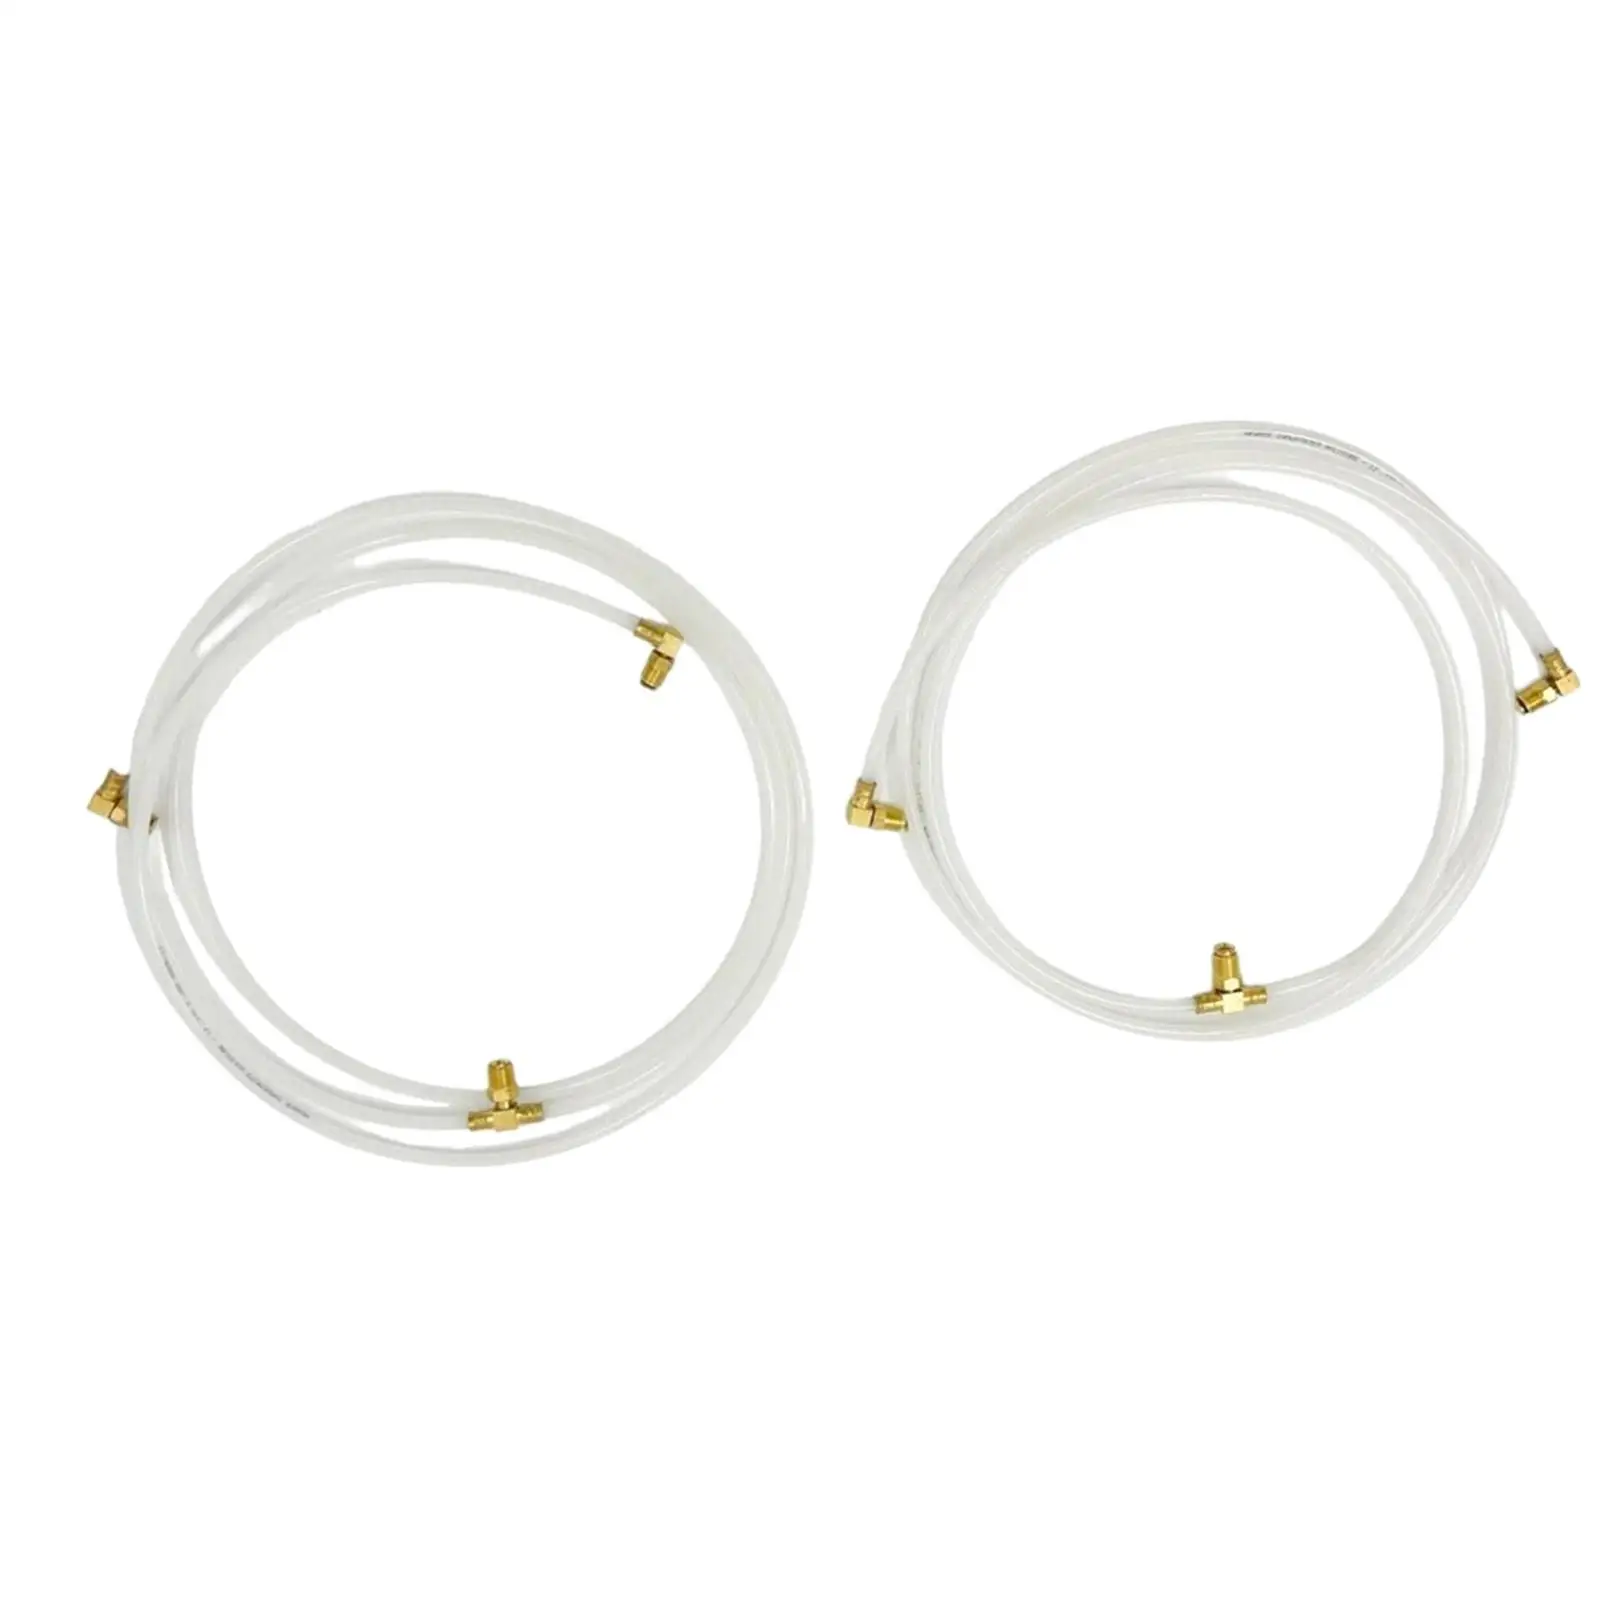 Pair Convertible Top Hydraulic Fluid Hose Lines Ho-white-set for Chevrolet Easy to Install Premium Professional Replacement